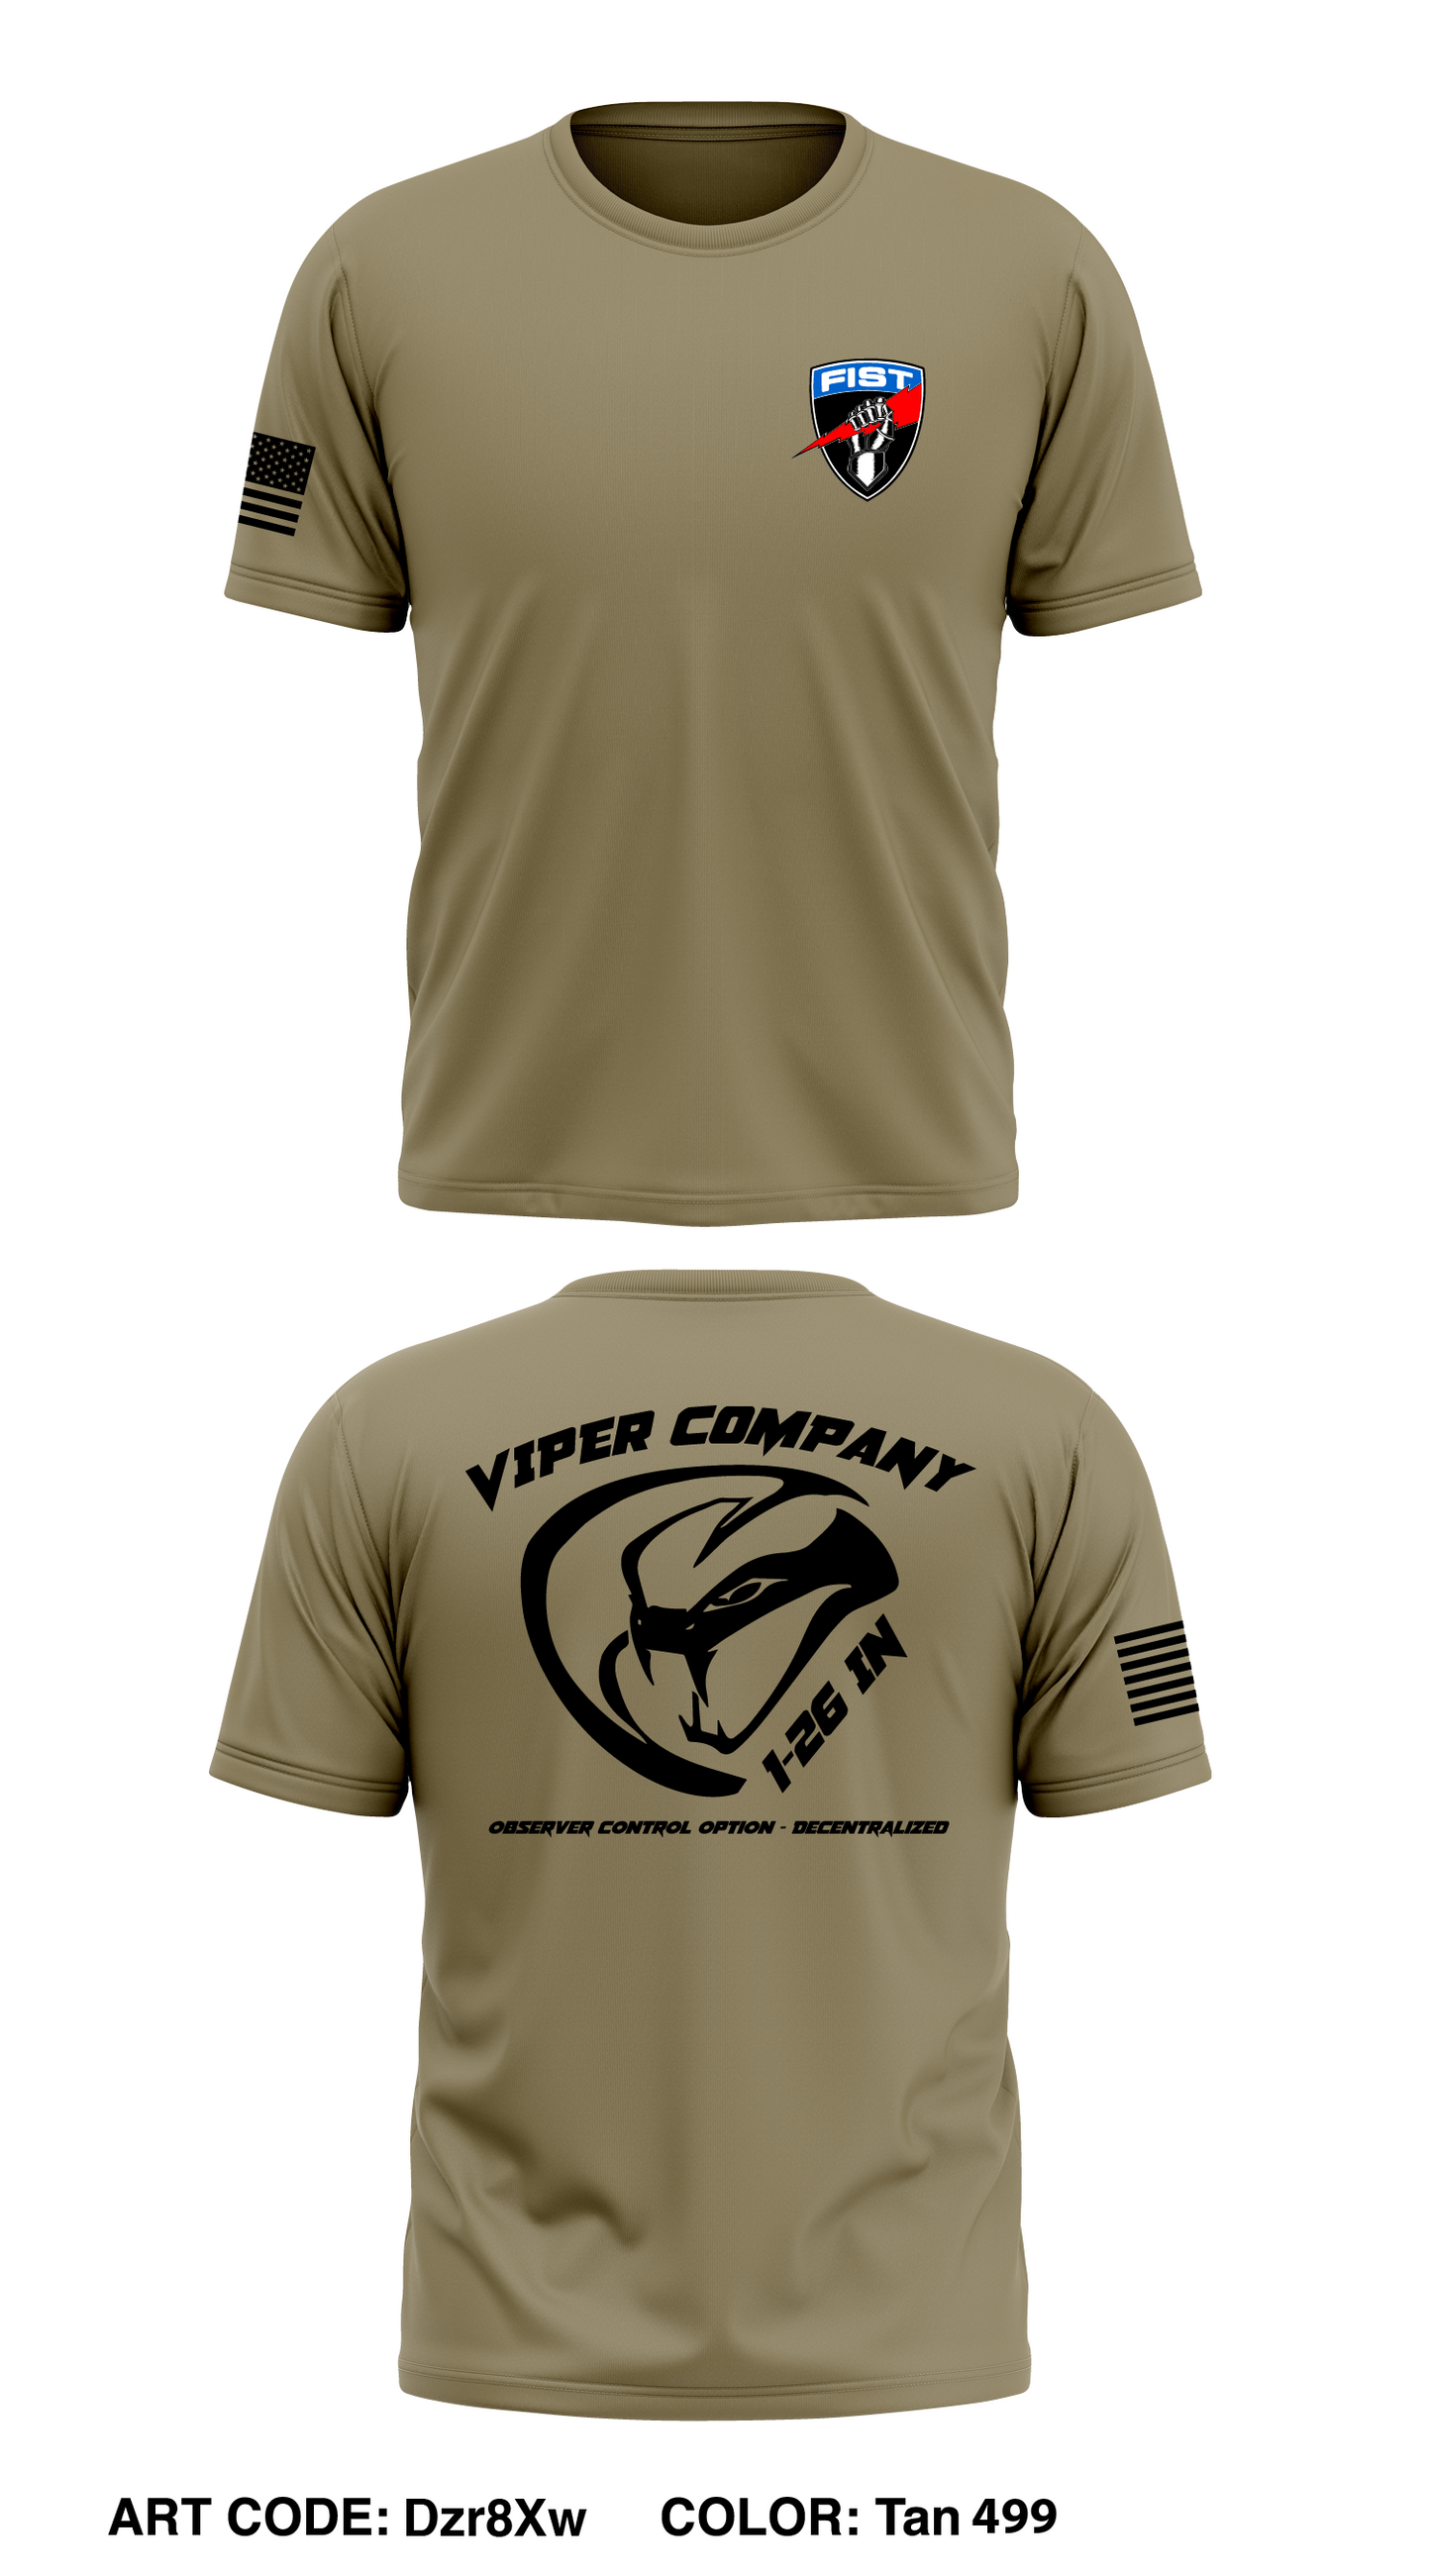 FIST, Viper Company, 1-26 IN Store 1 Core Men's SS Performance Tee